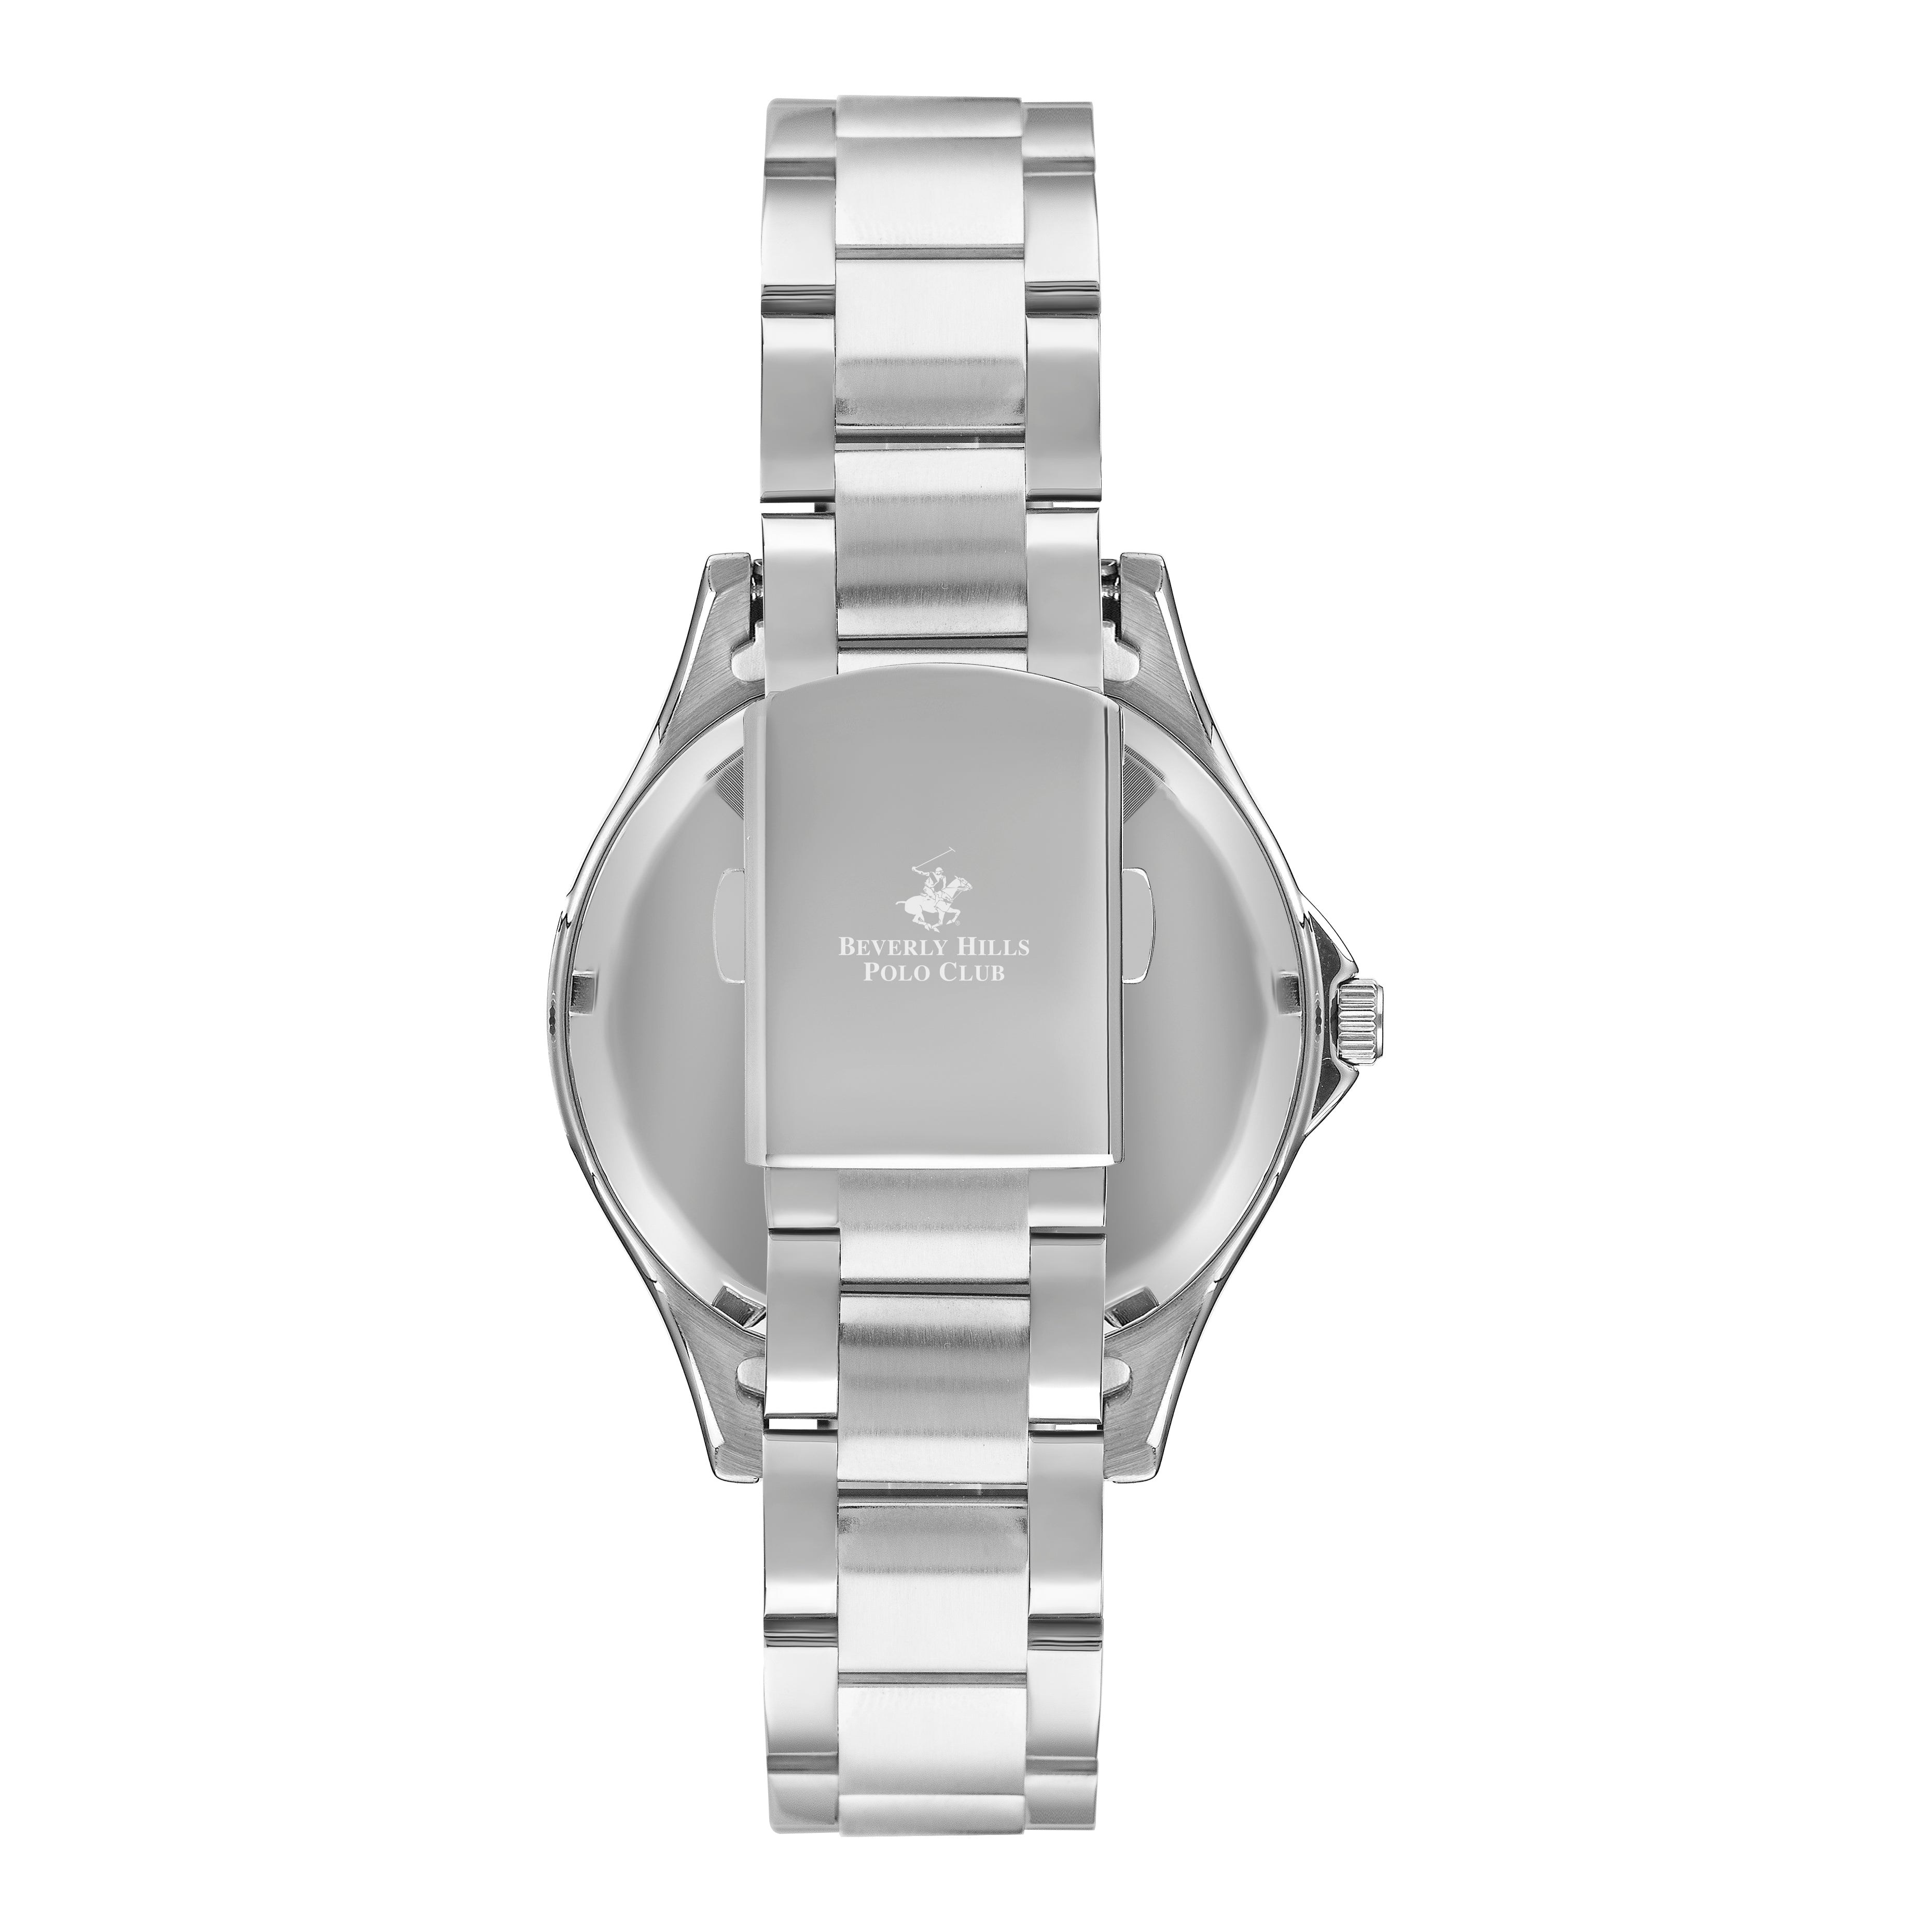 Polo - BP3239X.350 - Mens Stainless Steel Watch